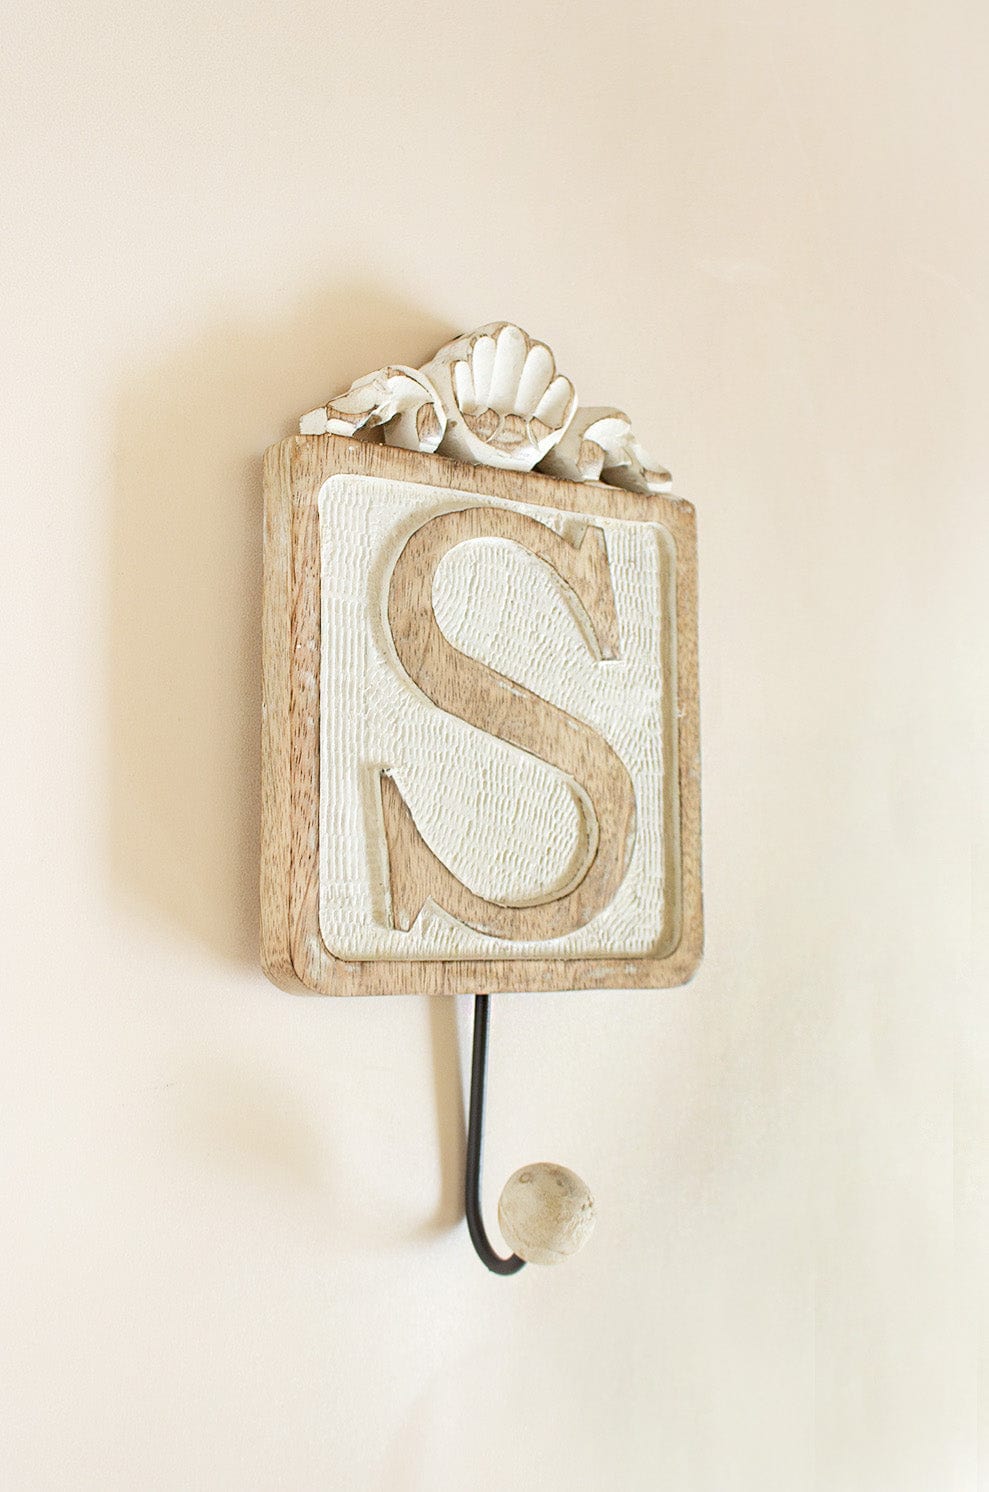 Letter Wall Hook / SABOUT: We found a great way to personalize wall hooks by giving each of them a single alphabet to have and hold. Now spell out your name, or B.E.D for a bedroom, L.OLetter Wall Hook /